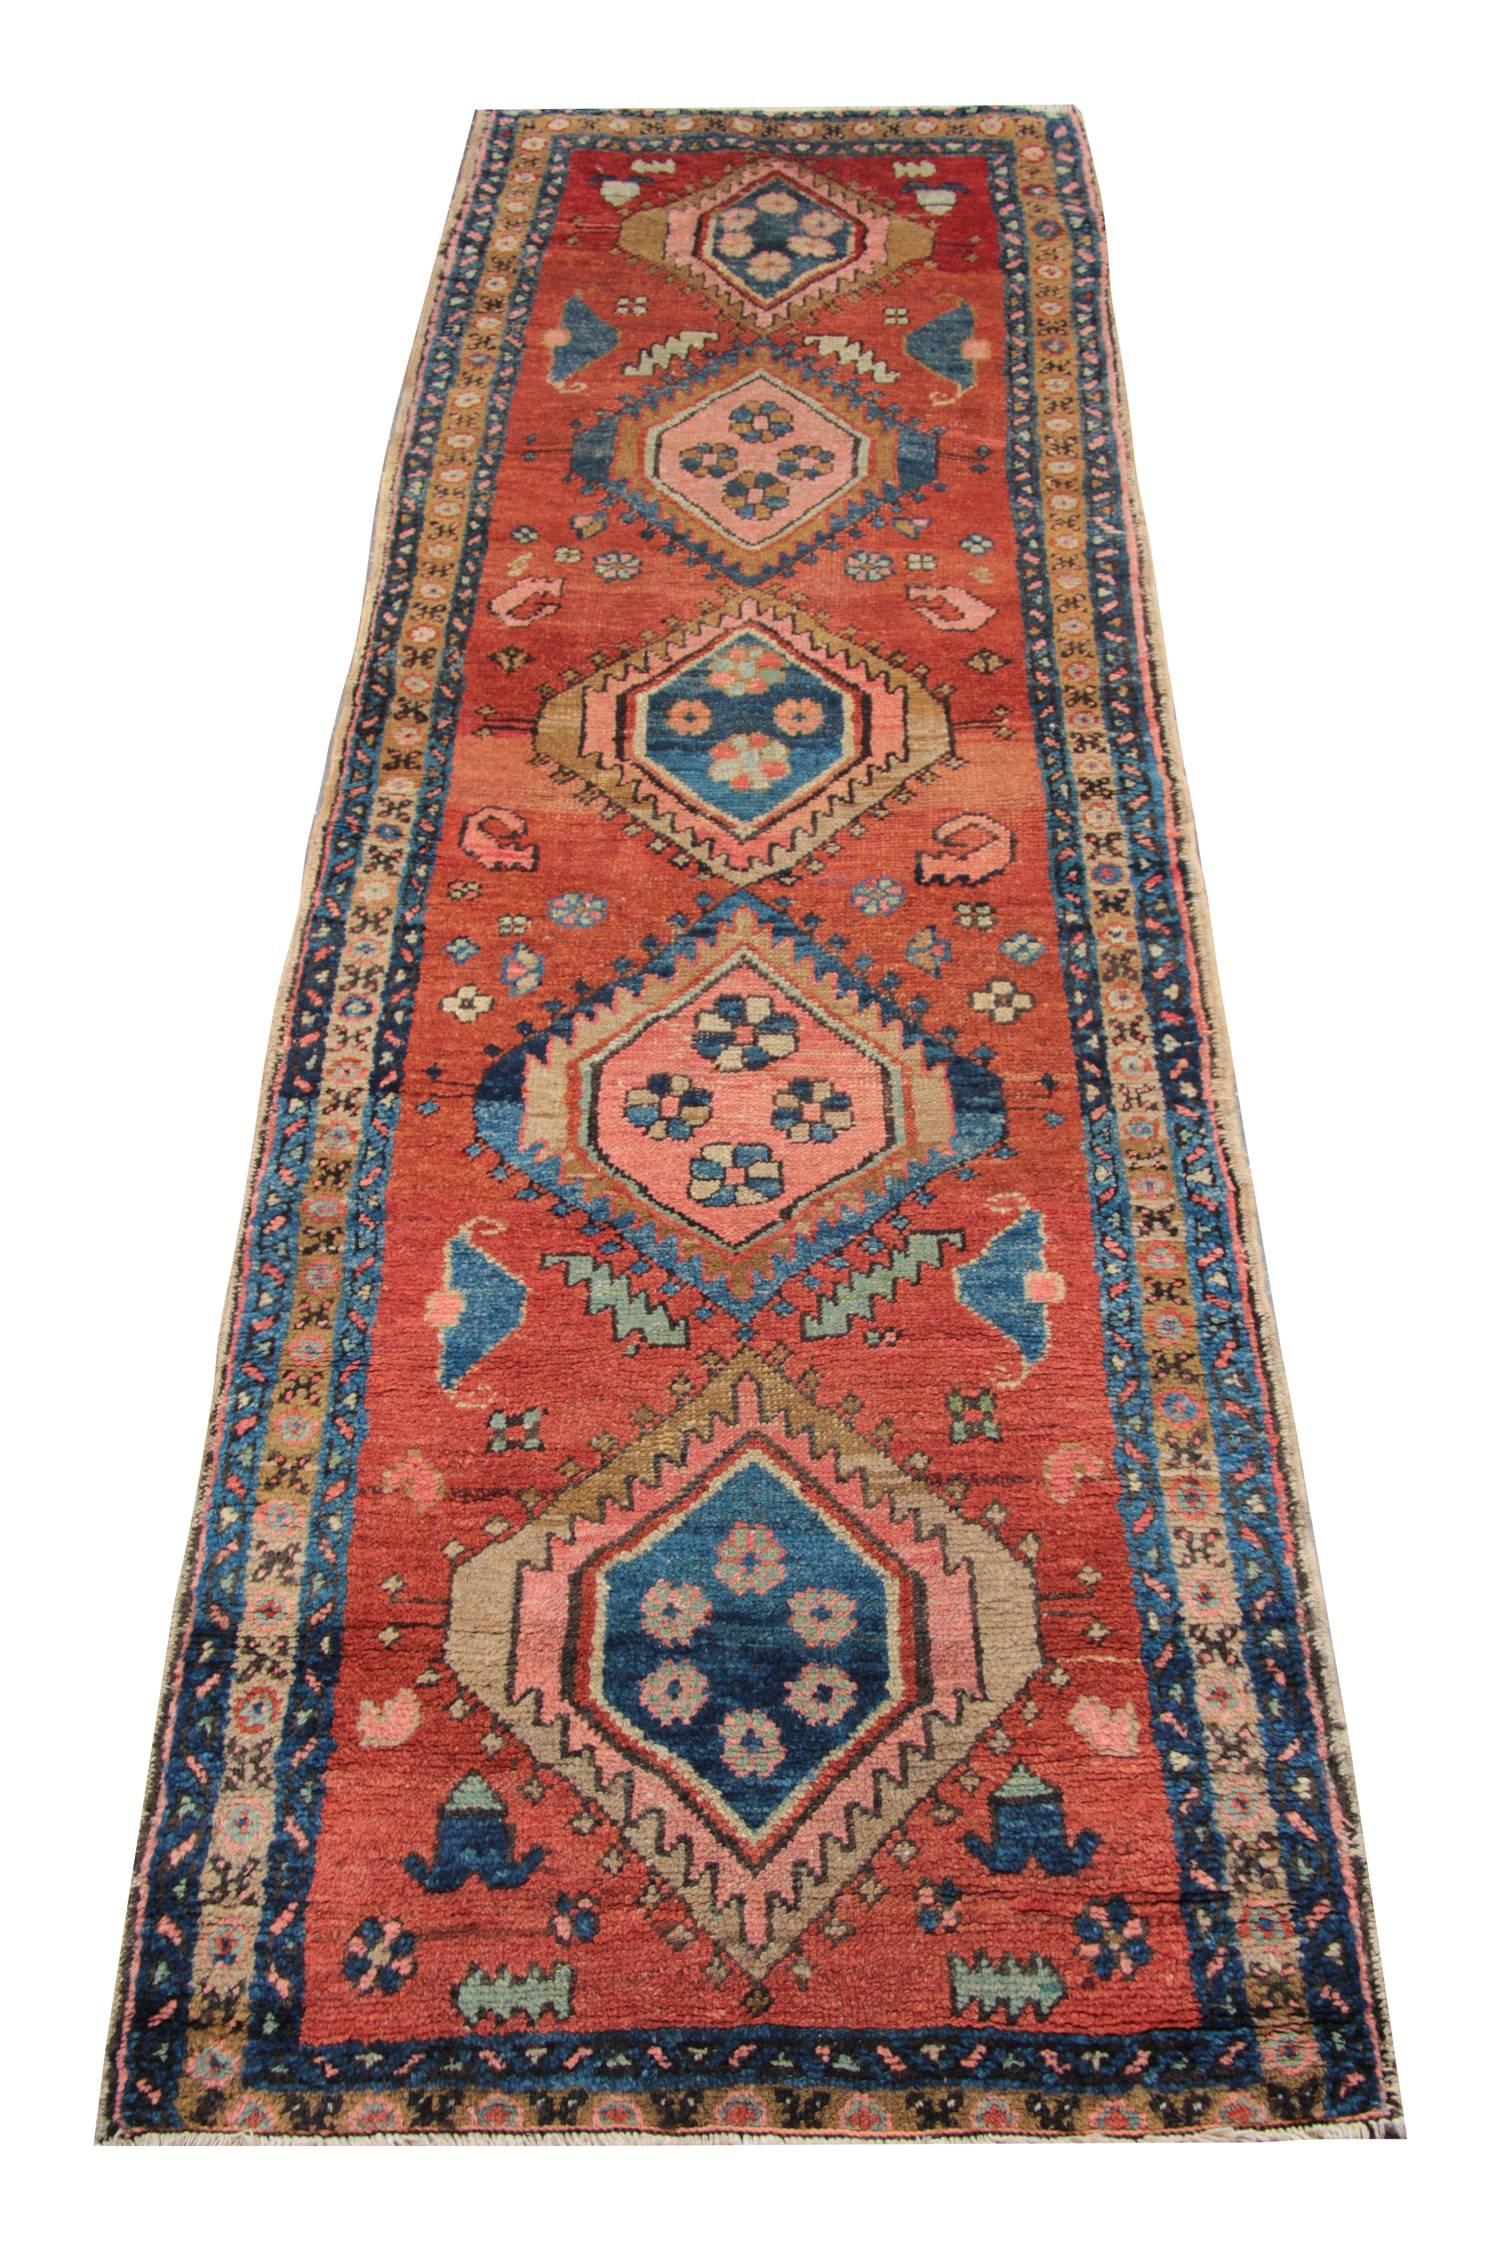 Antique orange rug hand-knotted wool stair runners featuring alternating medallions with an all-over geometric rug design on an orange field. These hallway rugs surrounded by a yellow border with serrated tribal rug 's motifs from north-west of